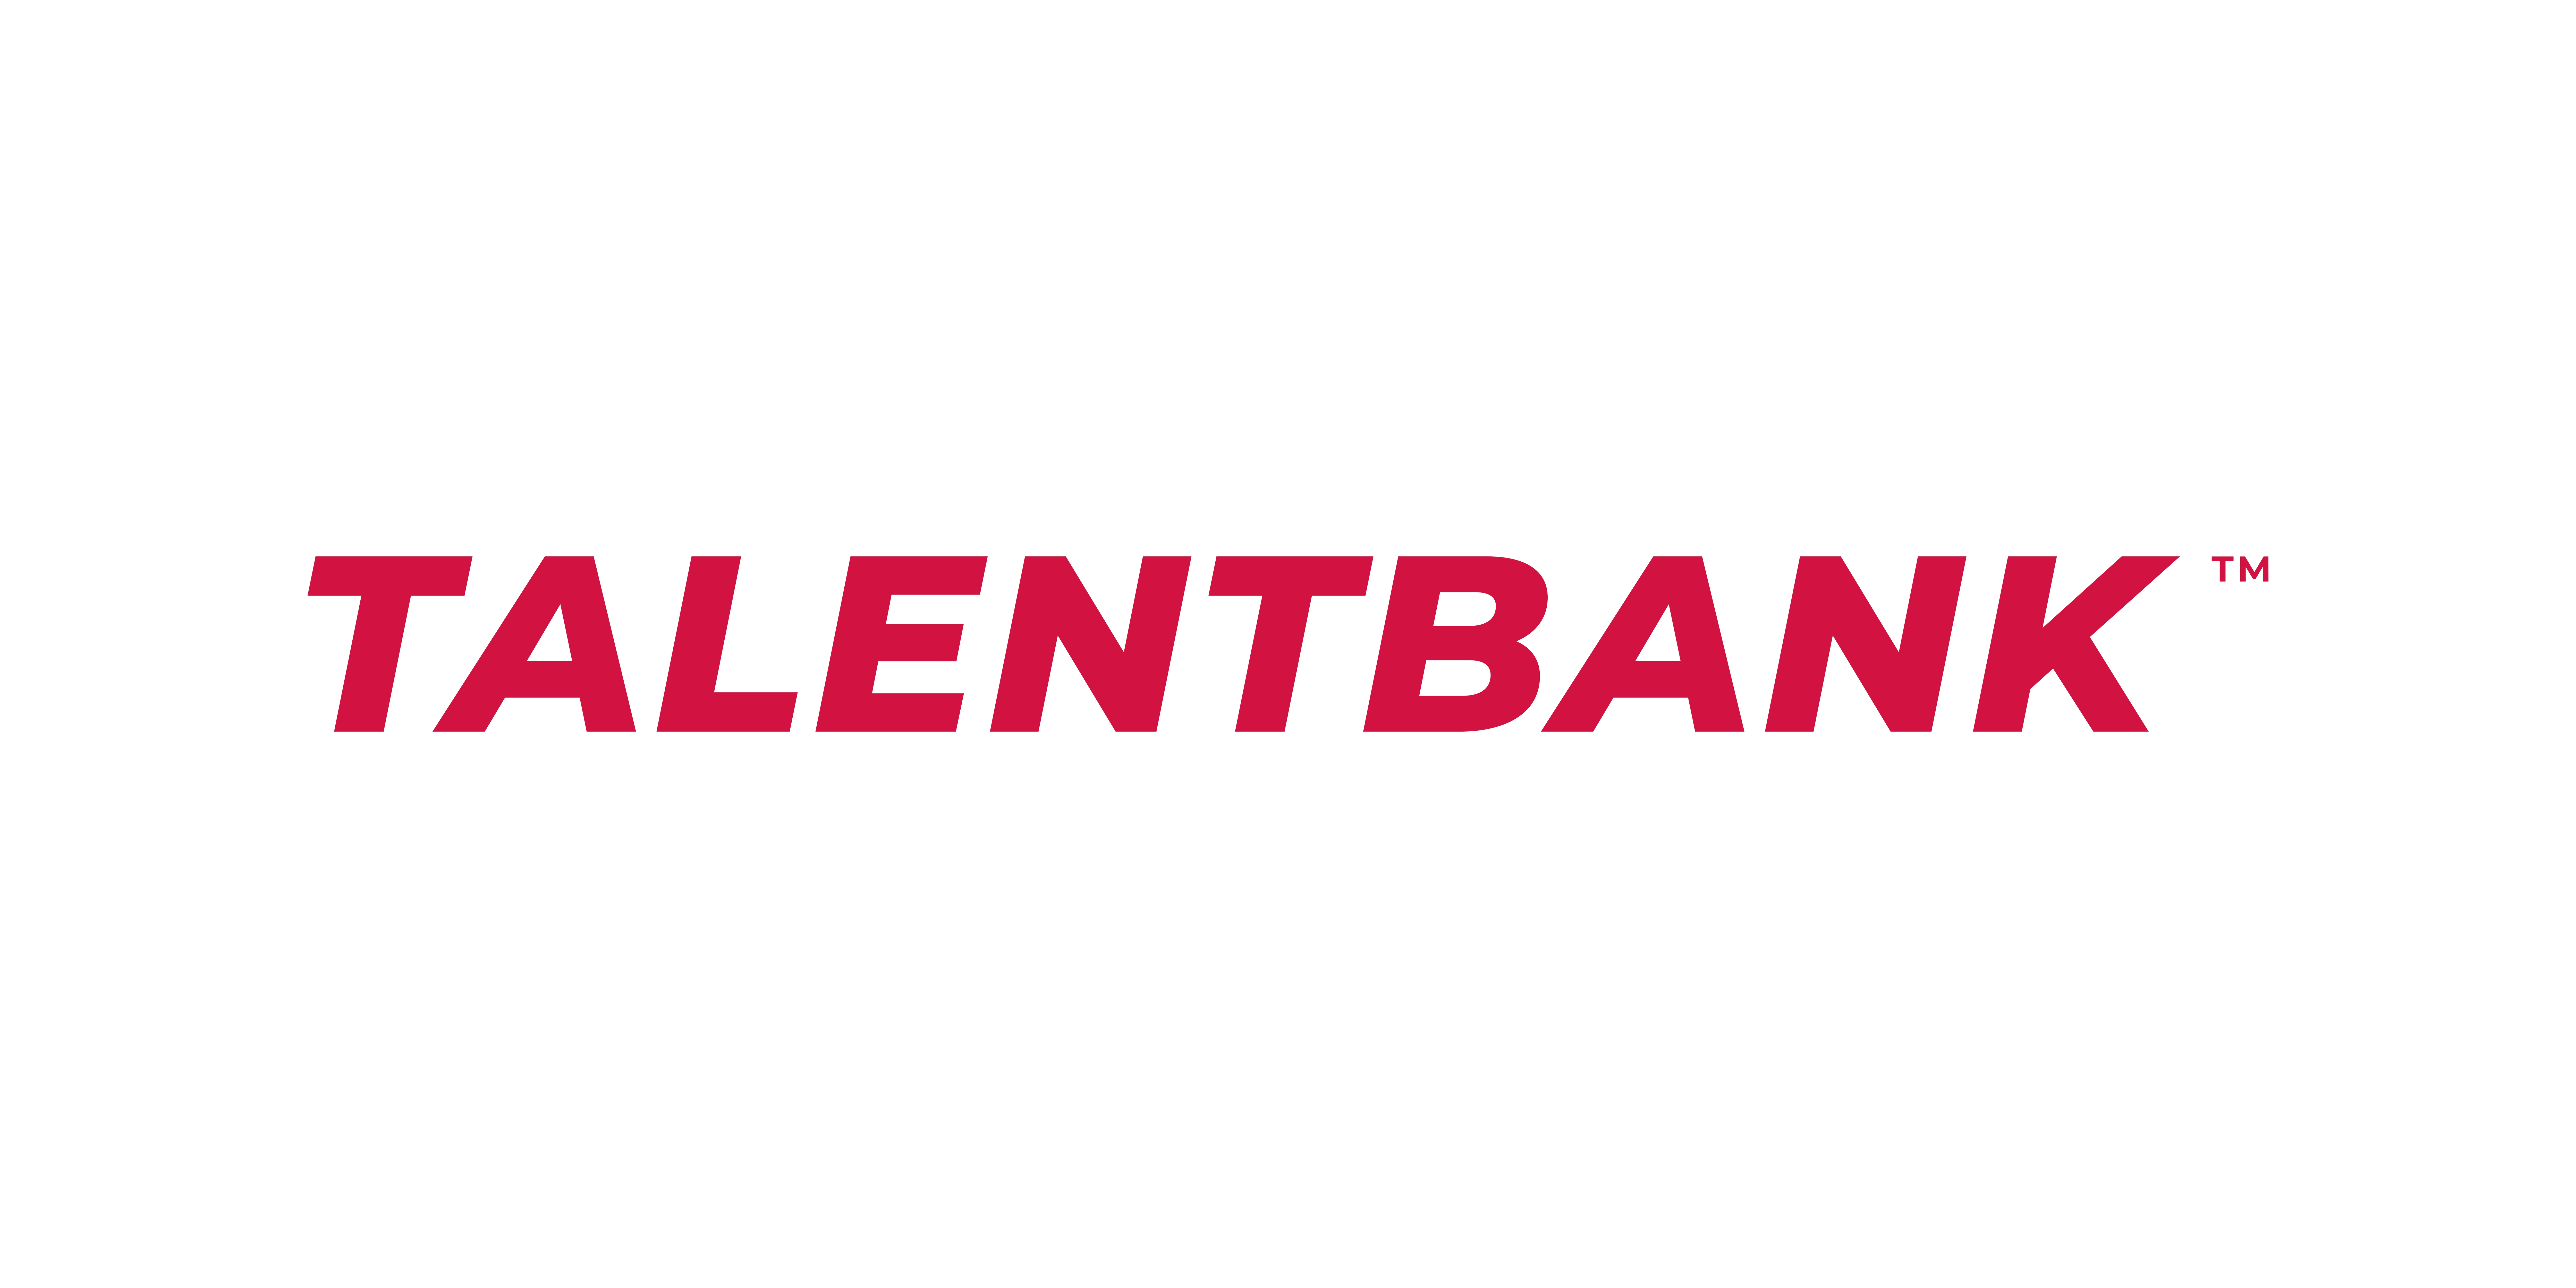 Talentbank Logo 60 OK pages to jpg 0002